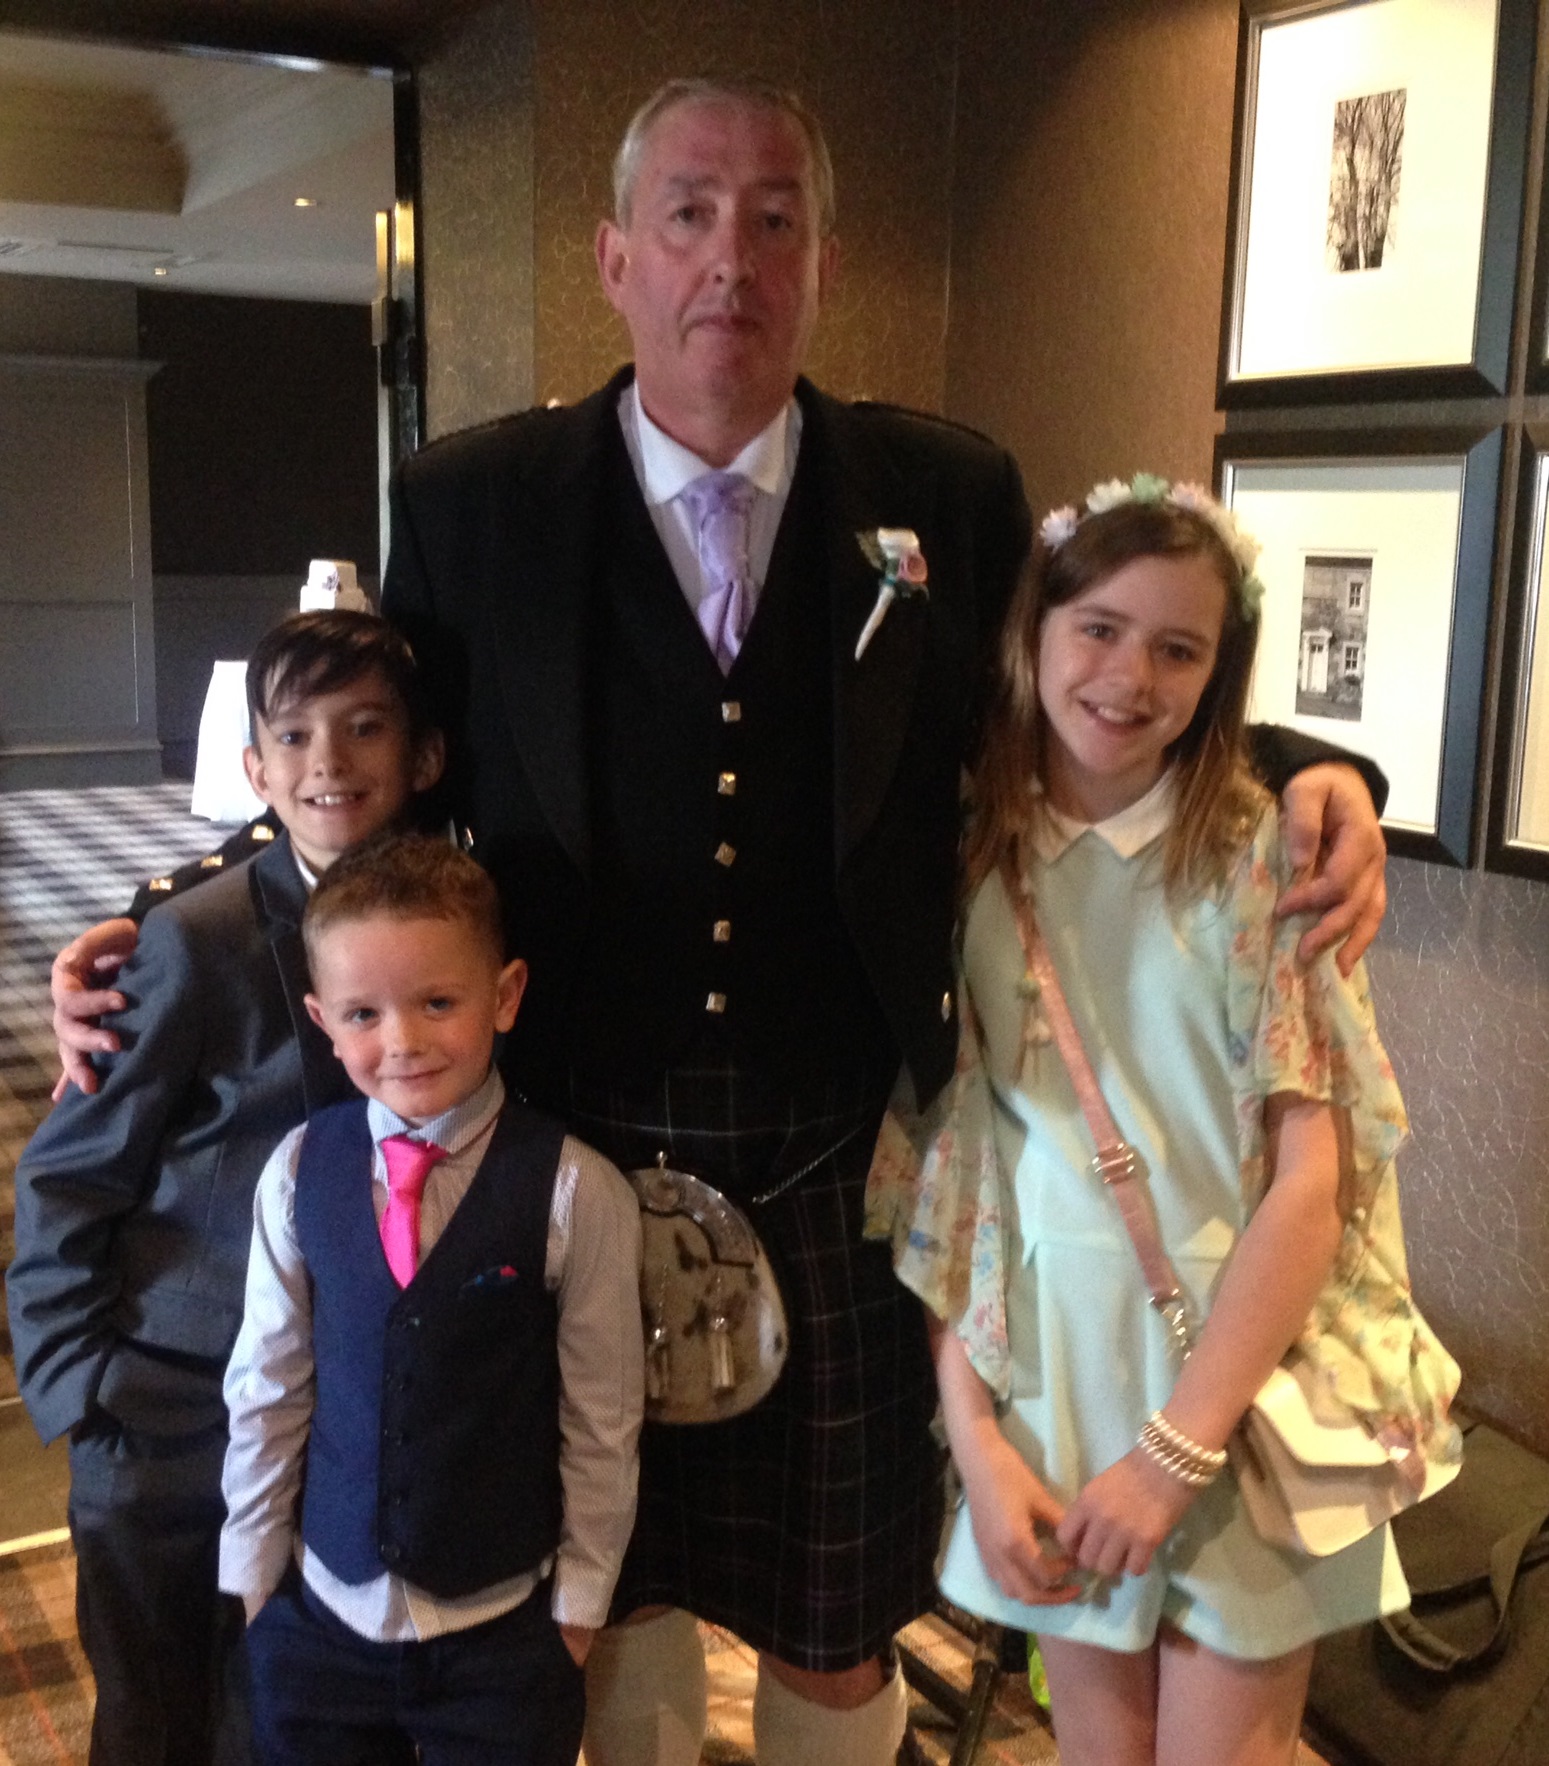 PerryGolf VIP Golf Coach Concierge Driver, Joe Marshall, with his lovely grandchildren at his son's wedding